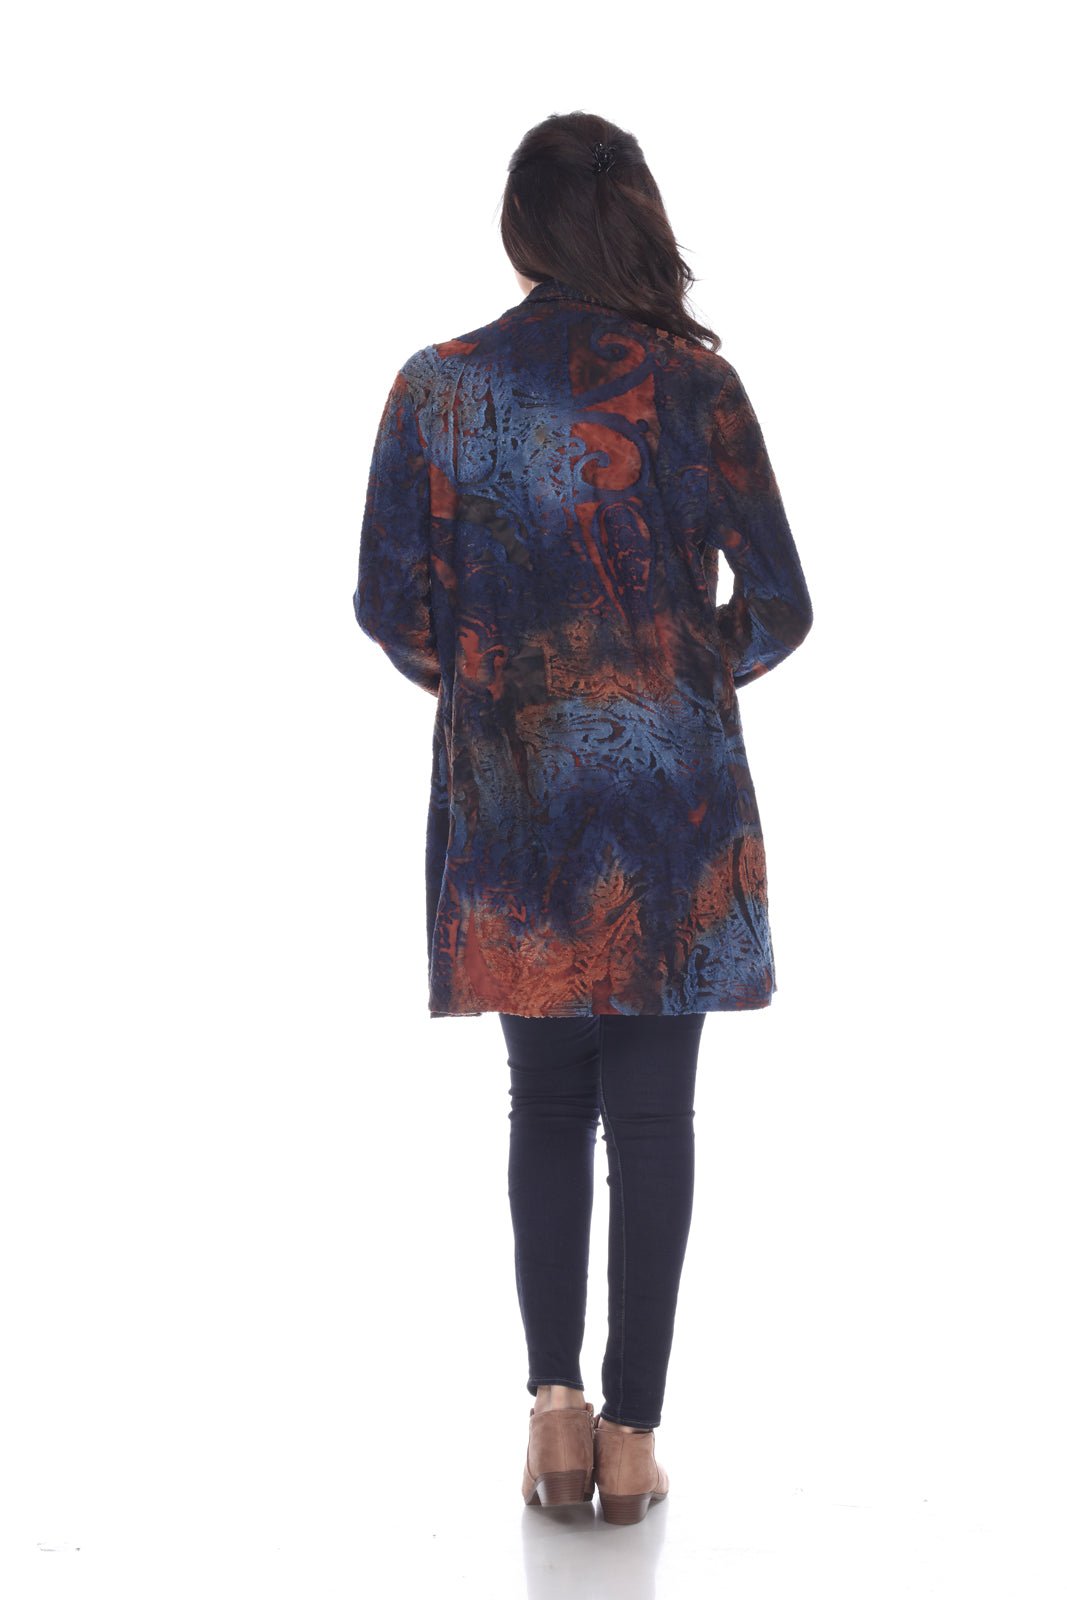 Burnout Tie Dye Floral Open Front Cardigan - Kamana Clothing